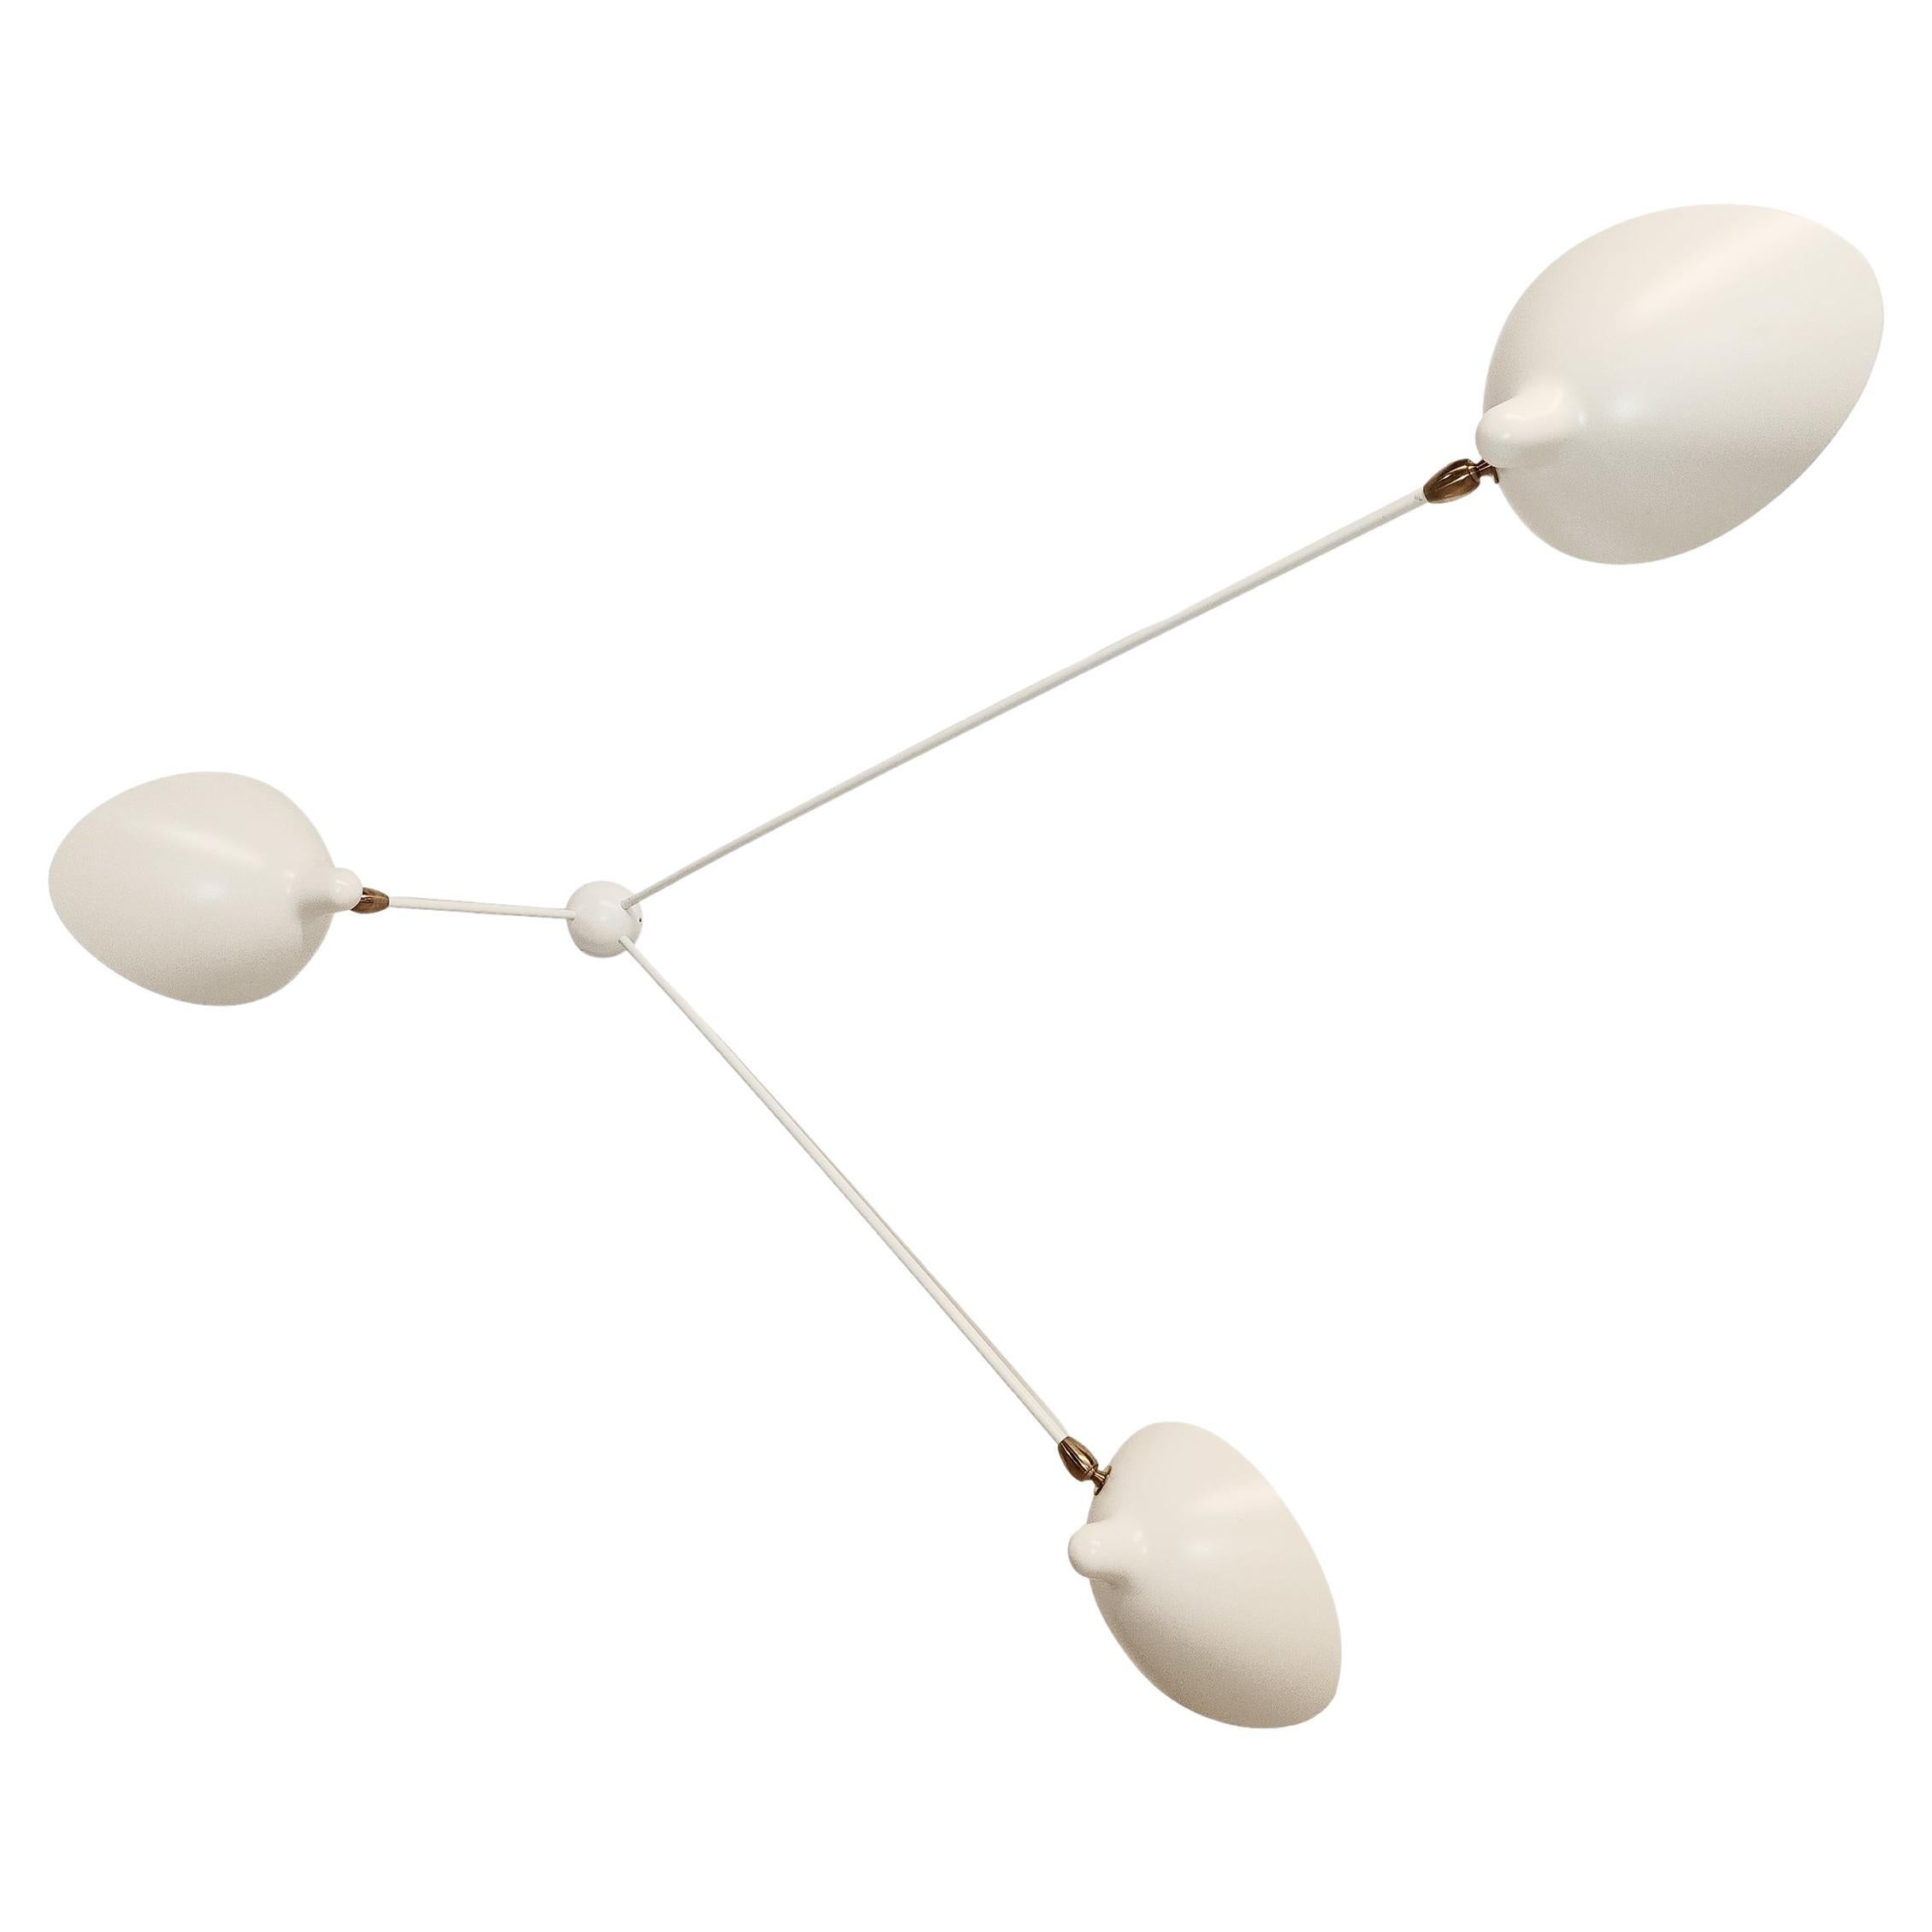 Serge Mouille - Spider Sconce with 3 Arms in White or Black For Sale